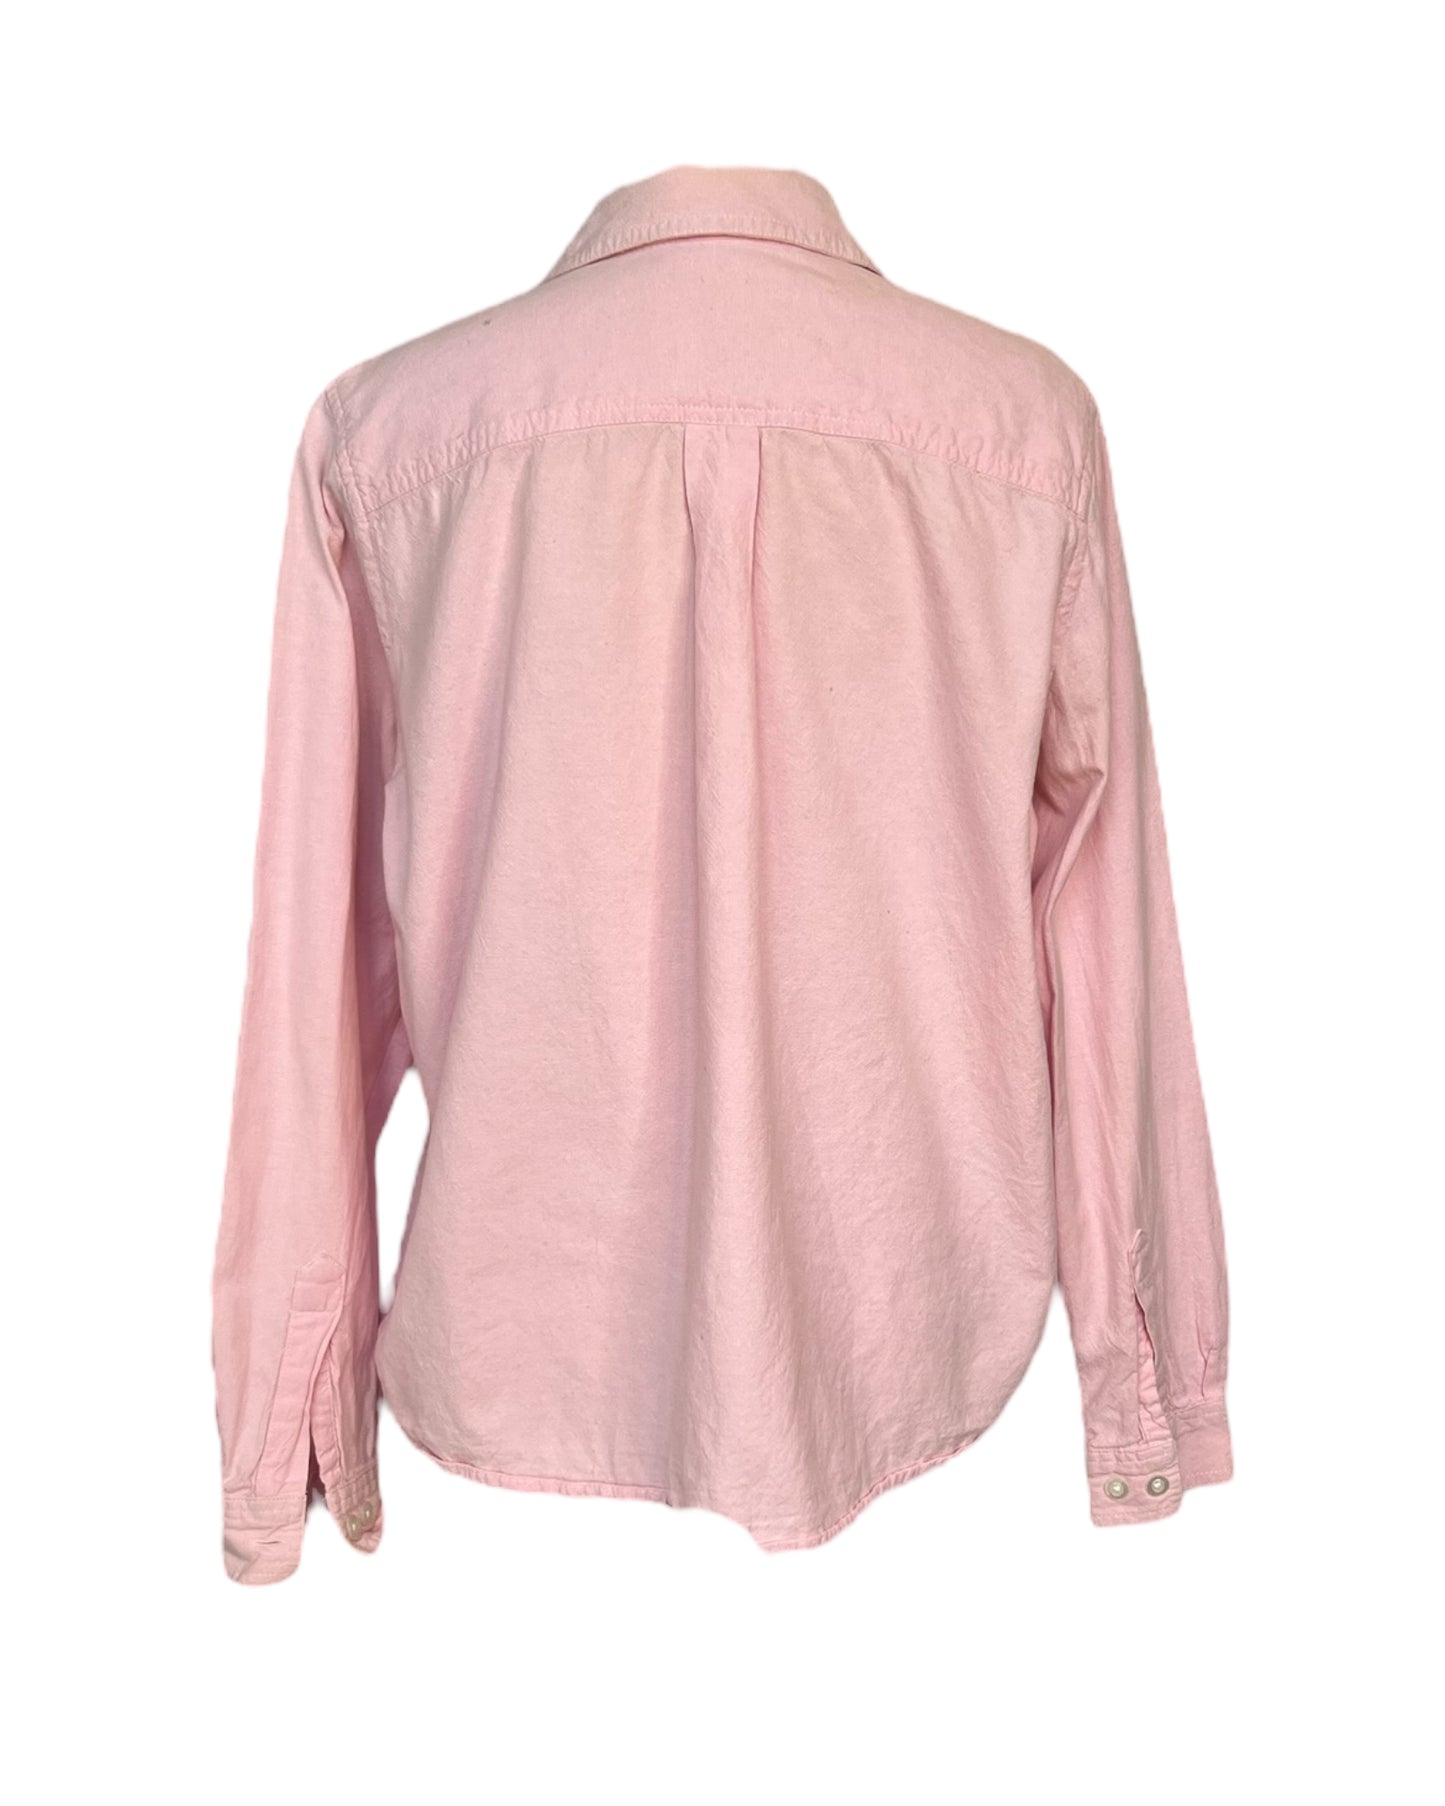 1990s I'll Have The Rosé Blouse